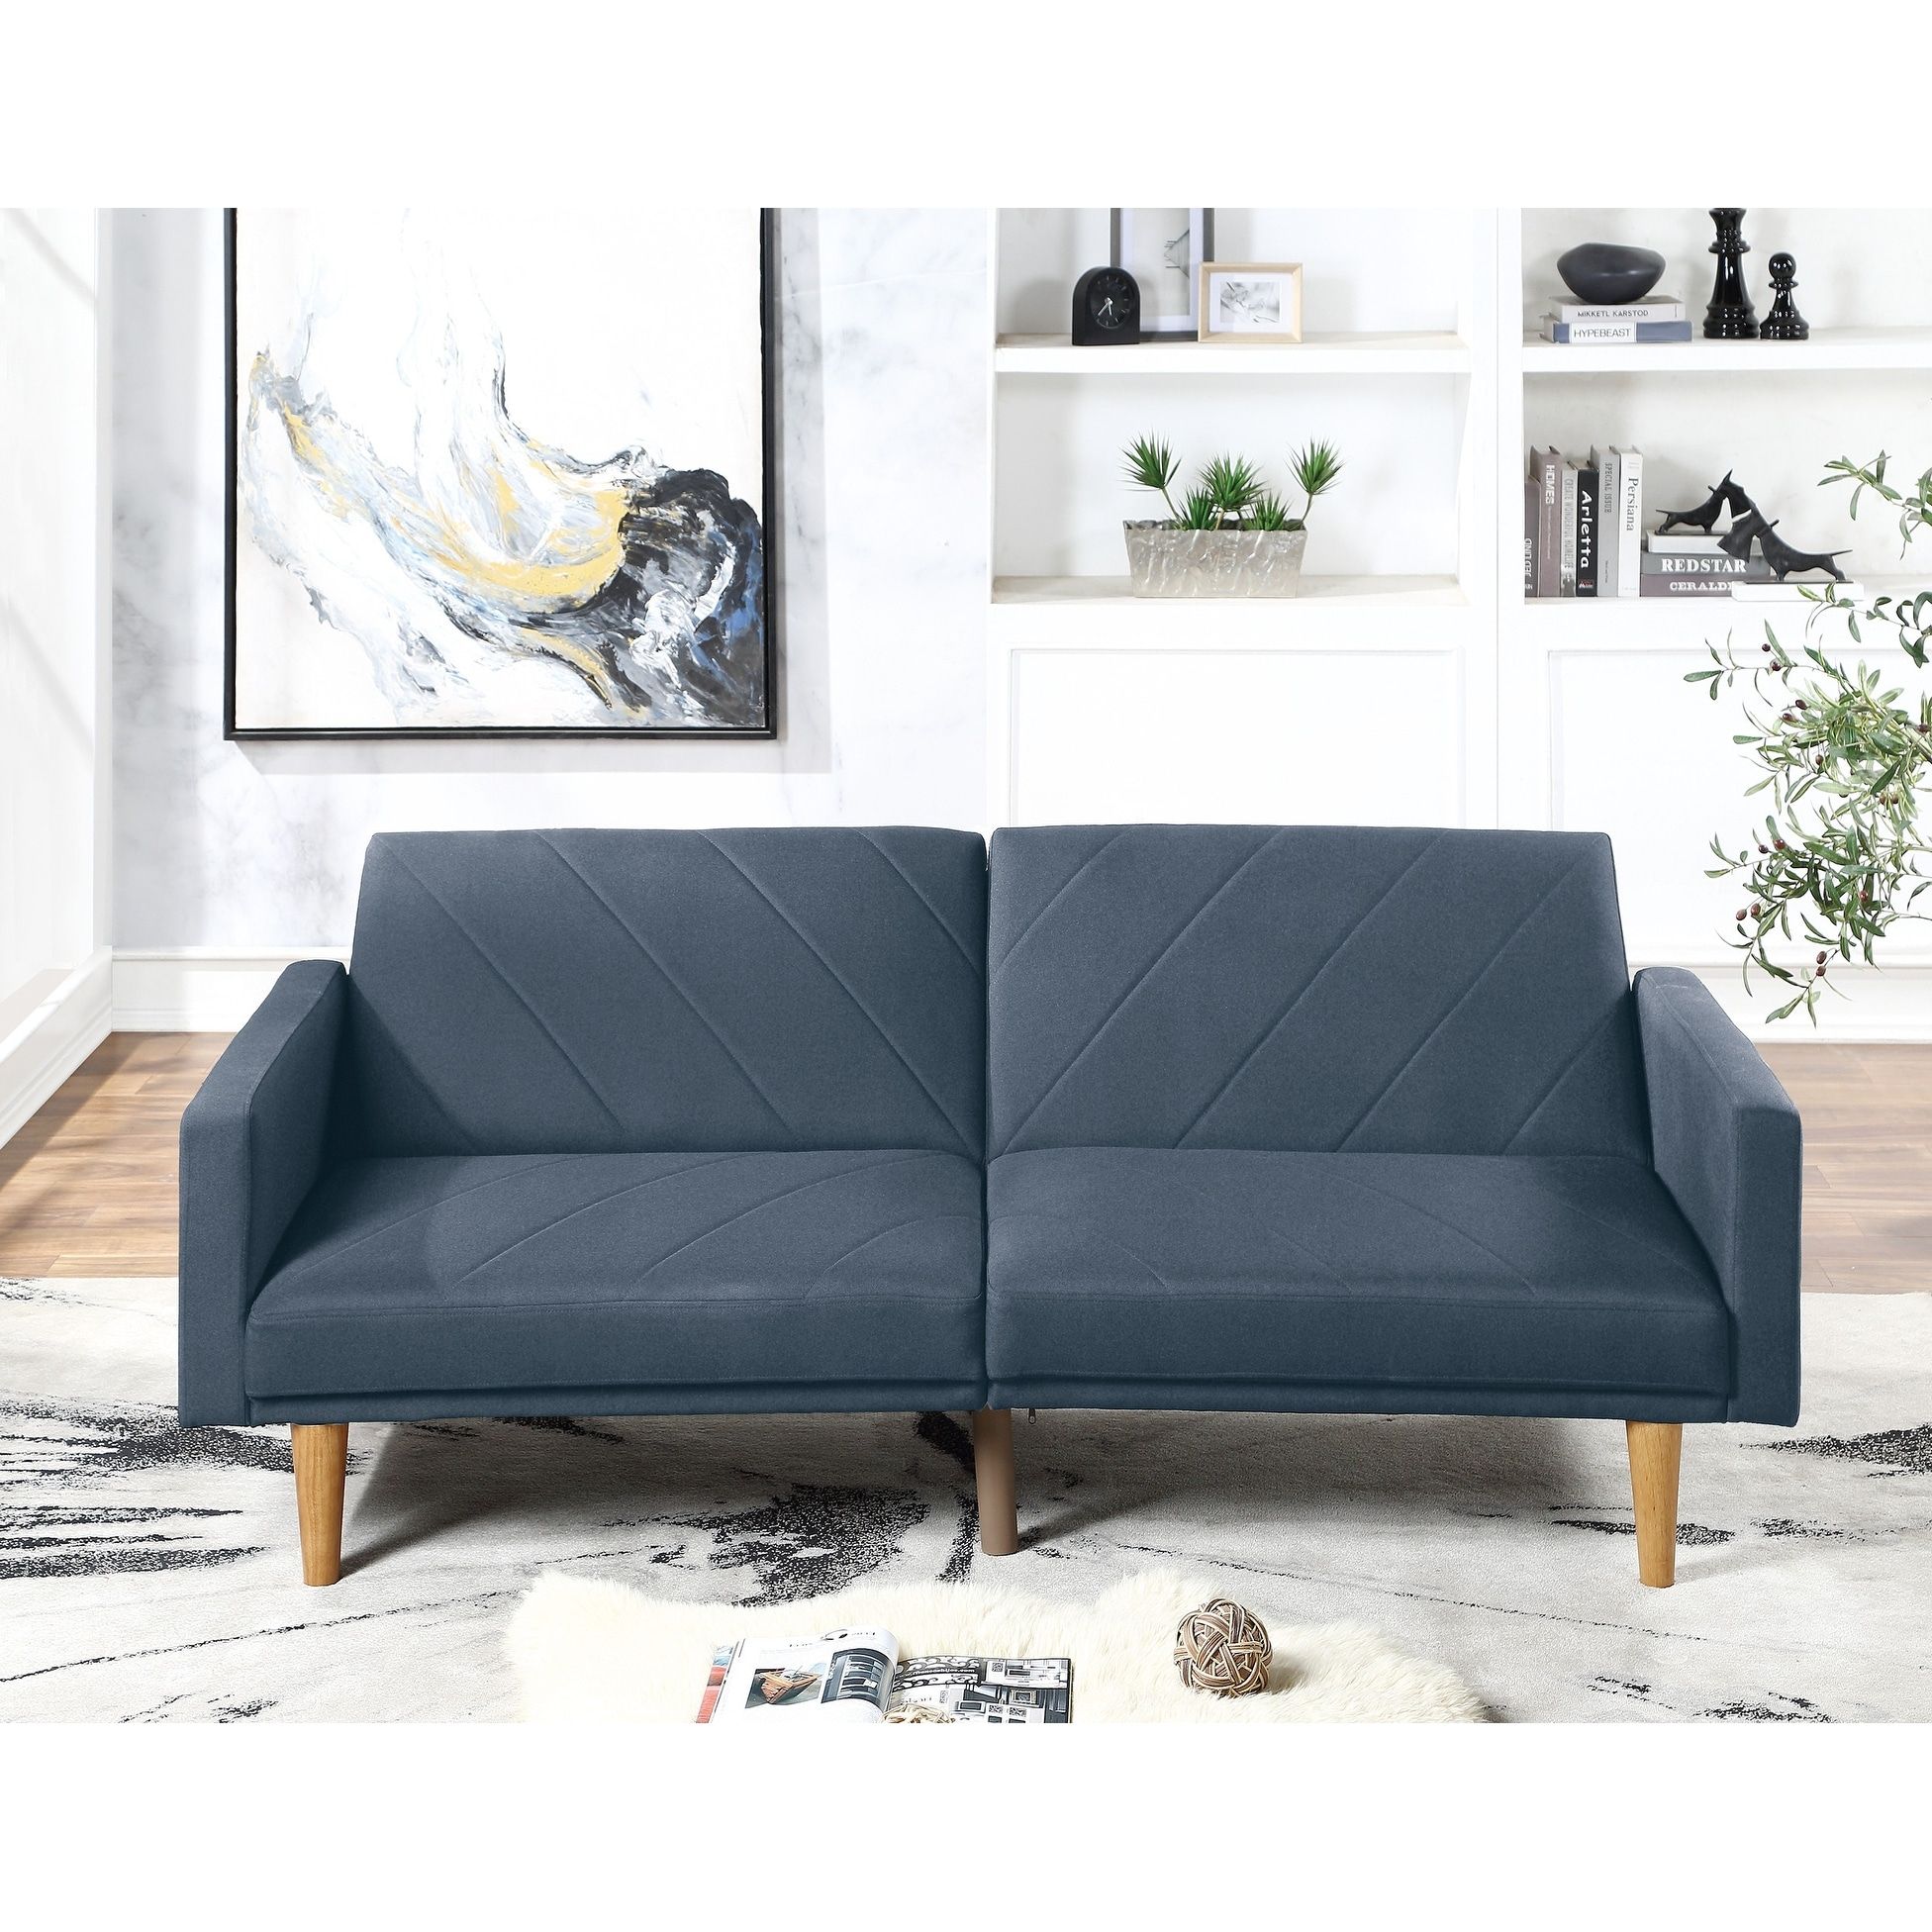 Modern Electric Look 1pc Convertible Sofa Couch Navy Color Linen Like  Fabric Cushion Wooden Legs Living Room – Bed Bath & Beyond – 35204646 Inside Navy Sleeper Sofa Couches (Photo 5 of 15)